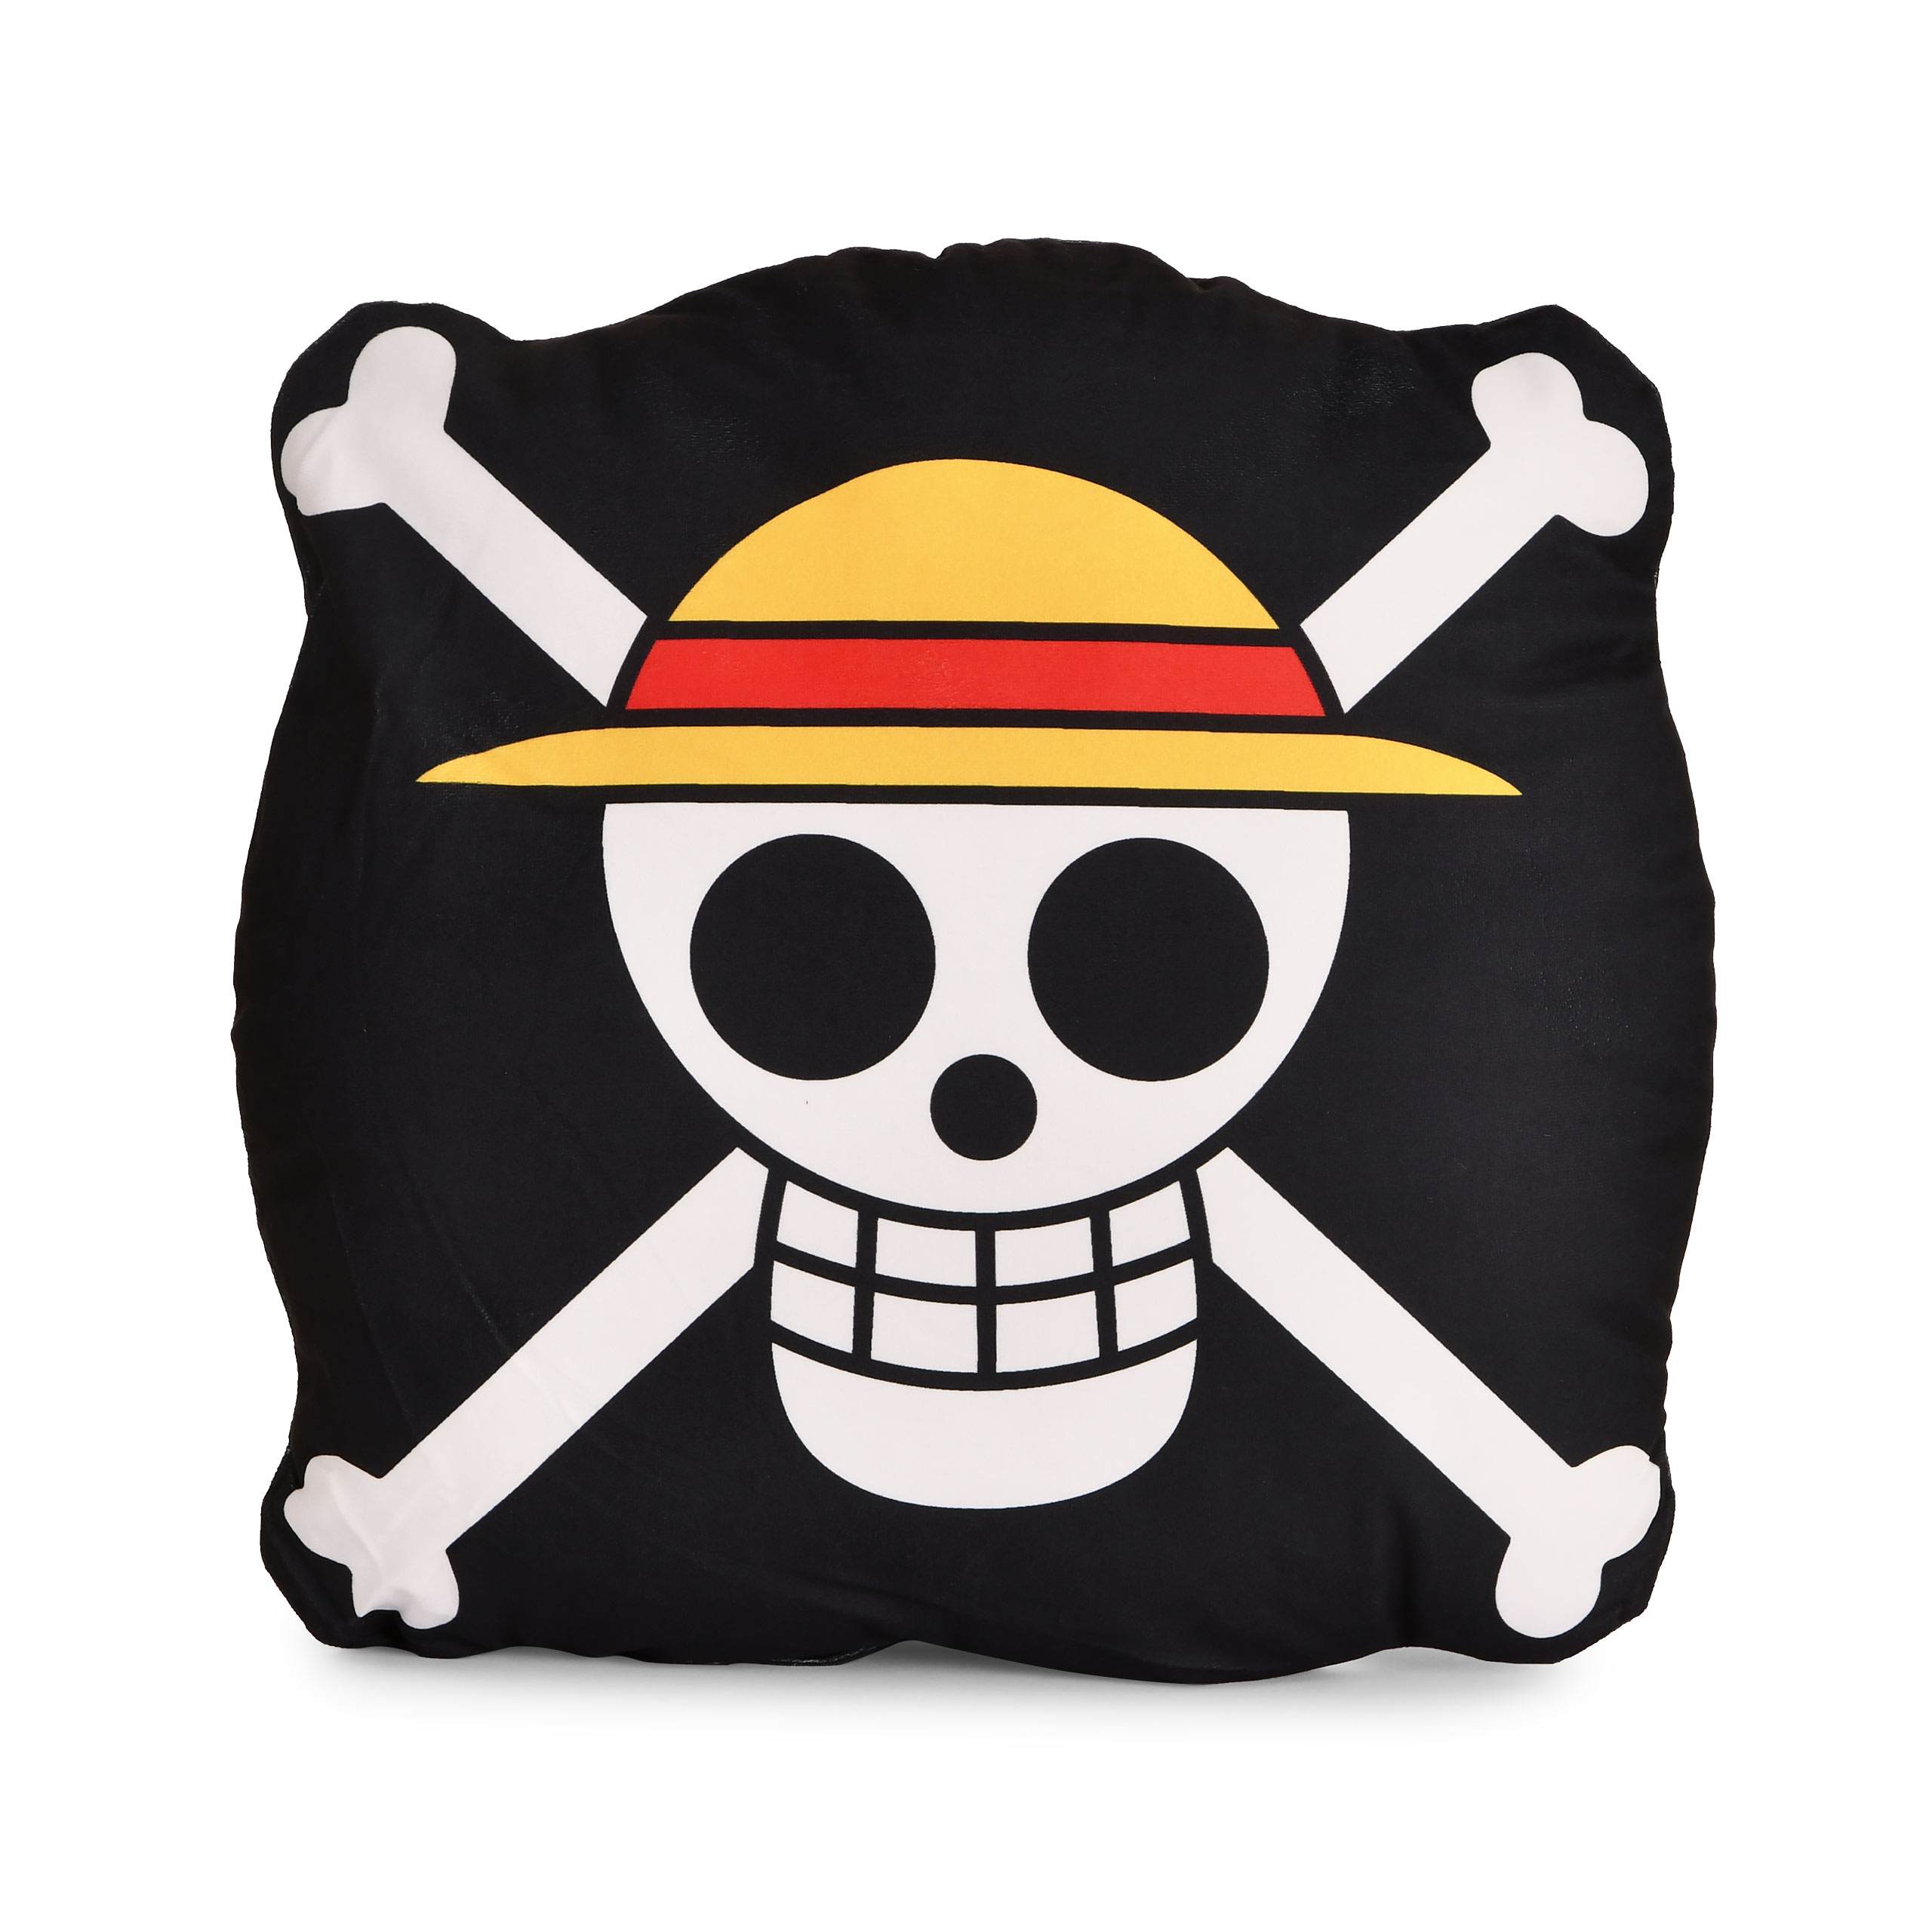 One Piece - Coussin Skull